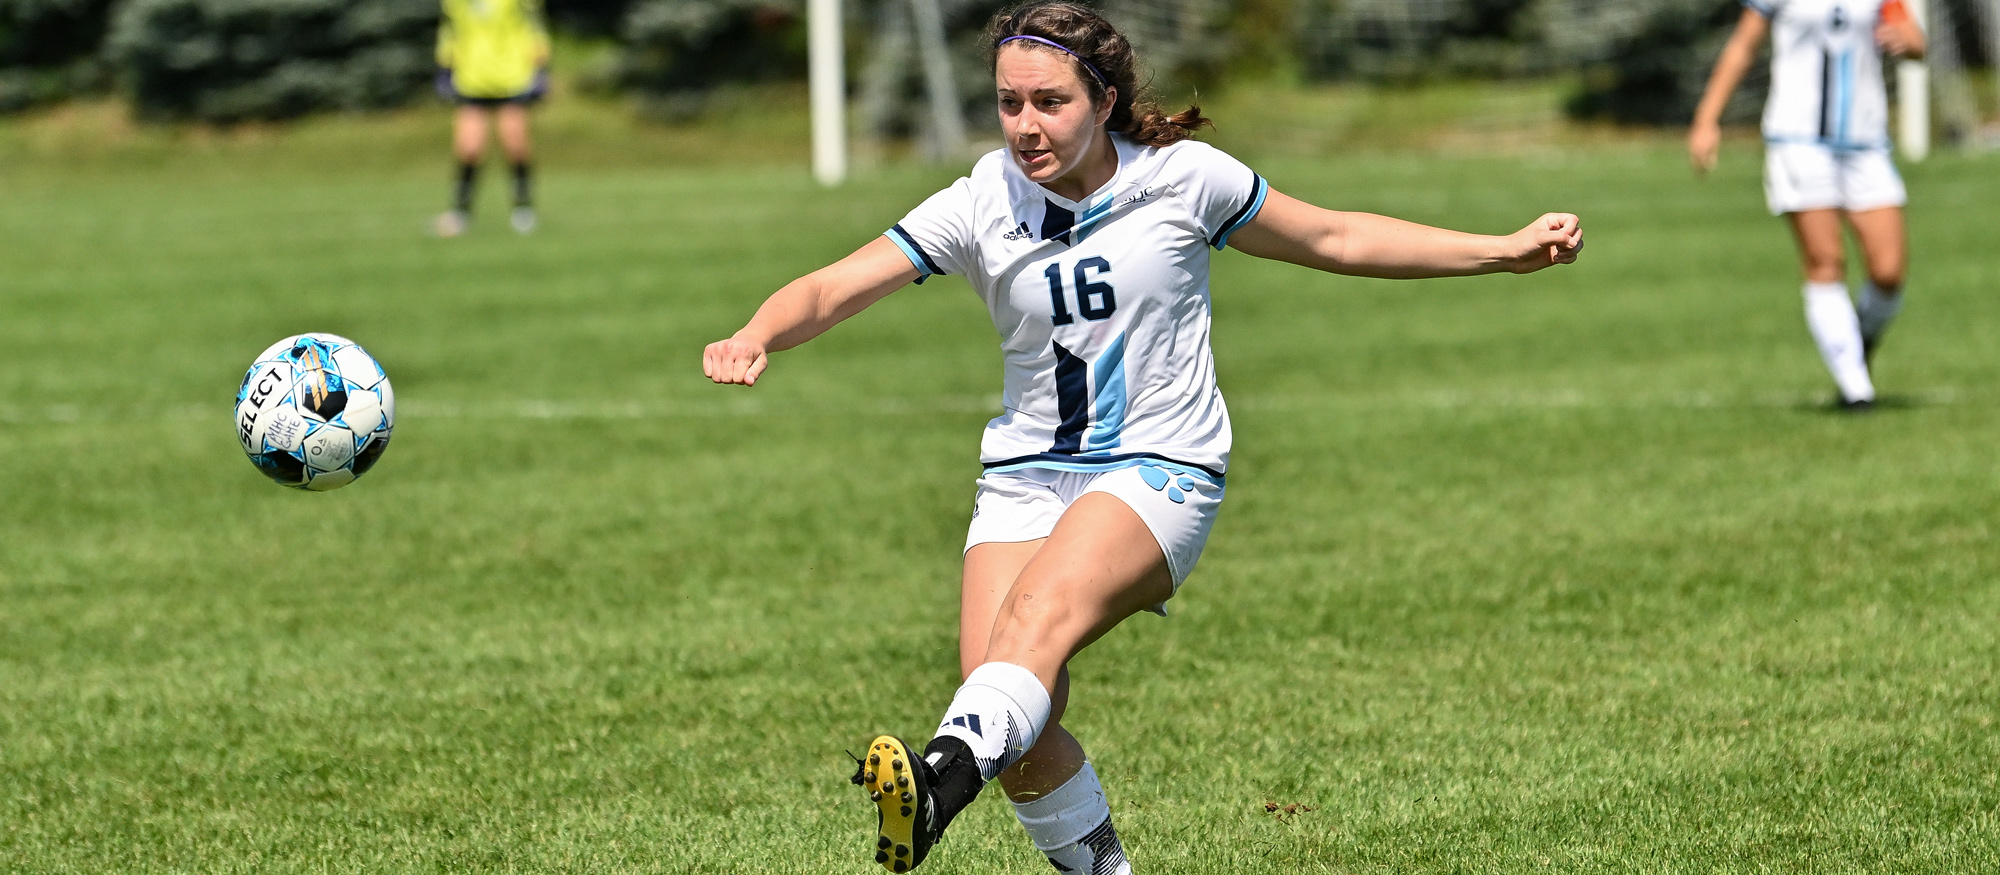 Dana Chateauneuf and Mount Holyoke fell 4-0 to Rhode Island College on Sept. 18, 2023. (RJB Sports file photo)